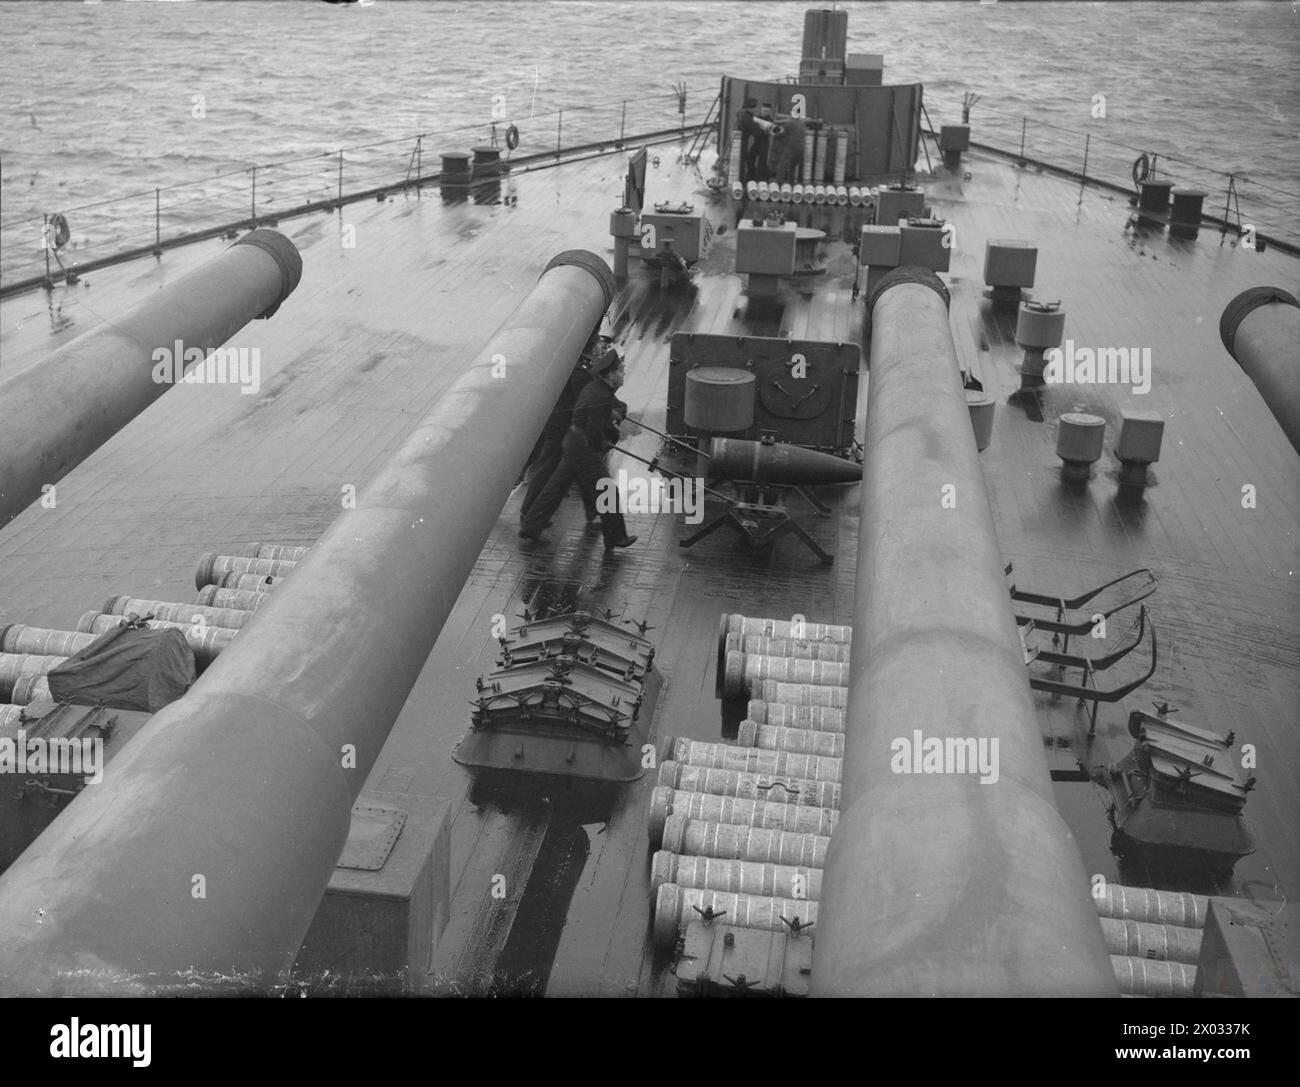 HMS KING GEORGE V GETS HER AMMUNITION QUOTA. 1941, ON BOARD THE BATTLESHIP IN PORT. - A shell on its way to the lowering hatch Stock Photo